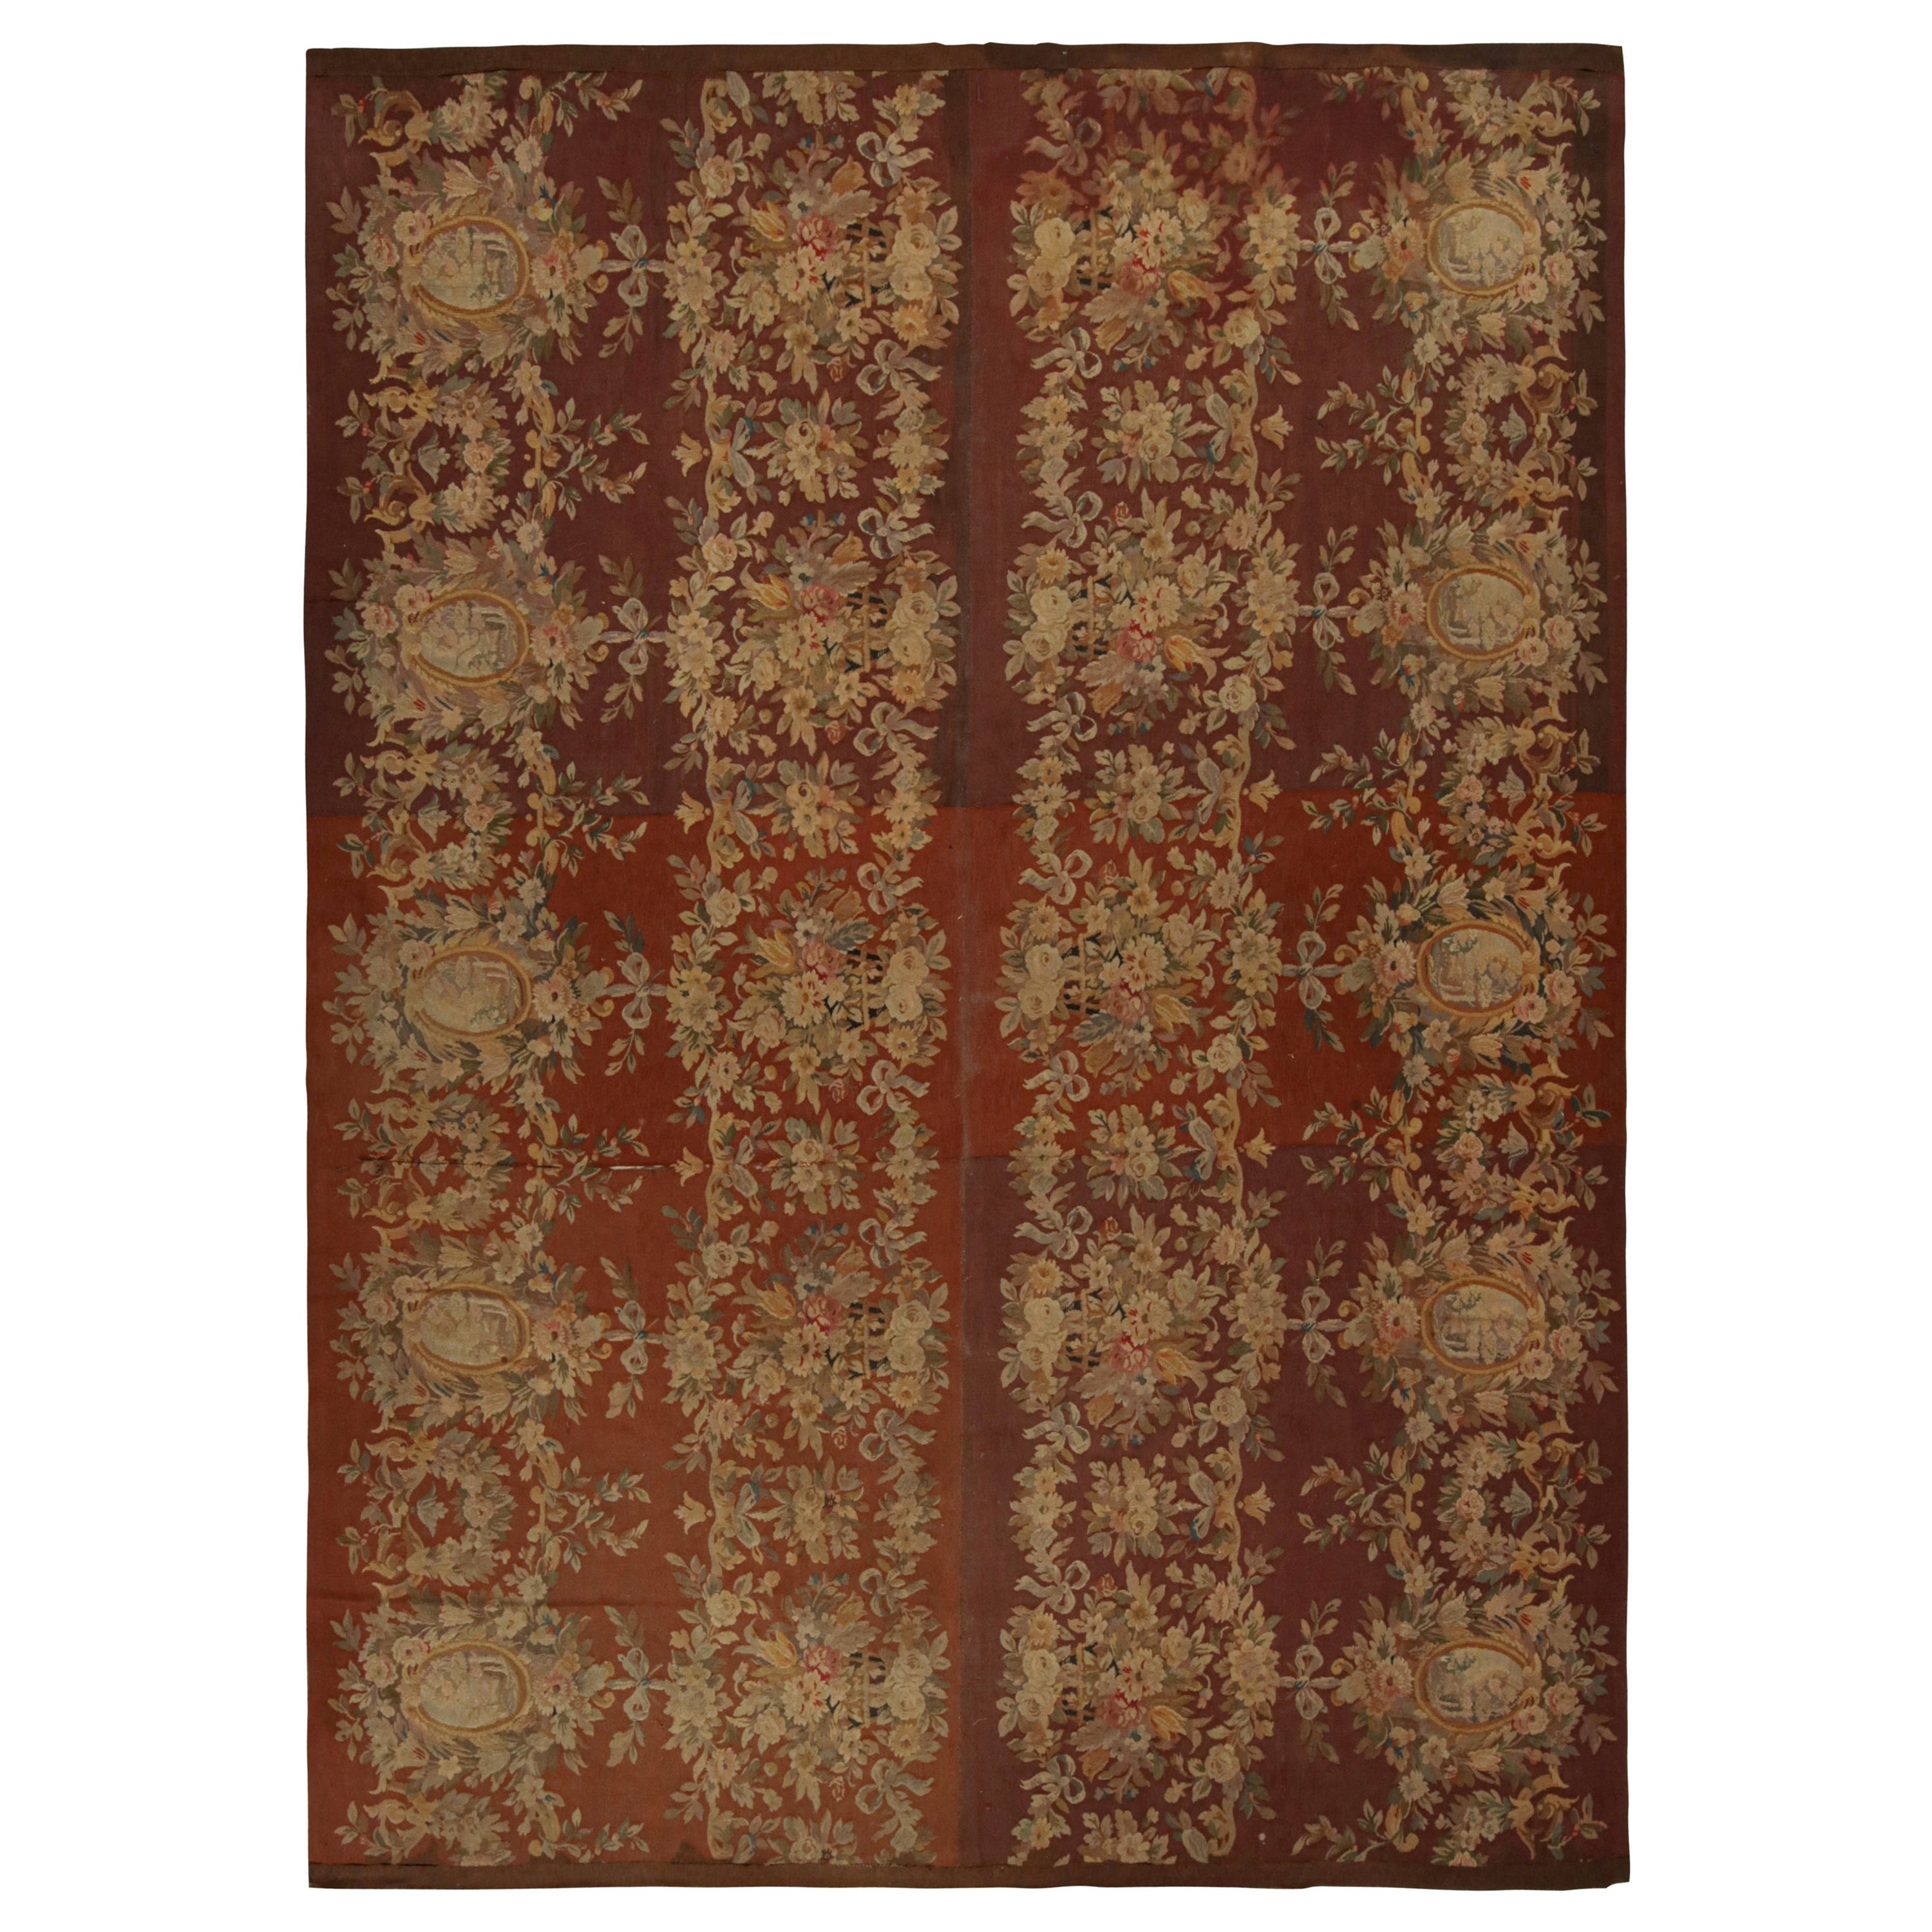 Vintage Aubusson Flatweave Rug in Brown with Floral Patterns, from Rug & Kilim For Sale